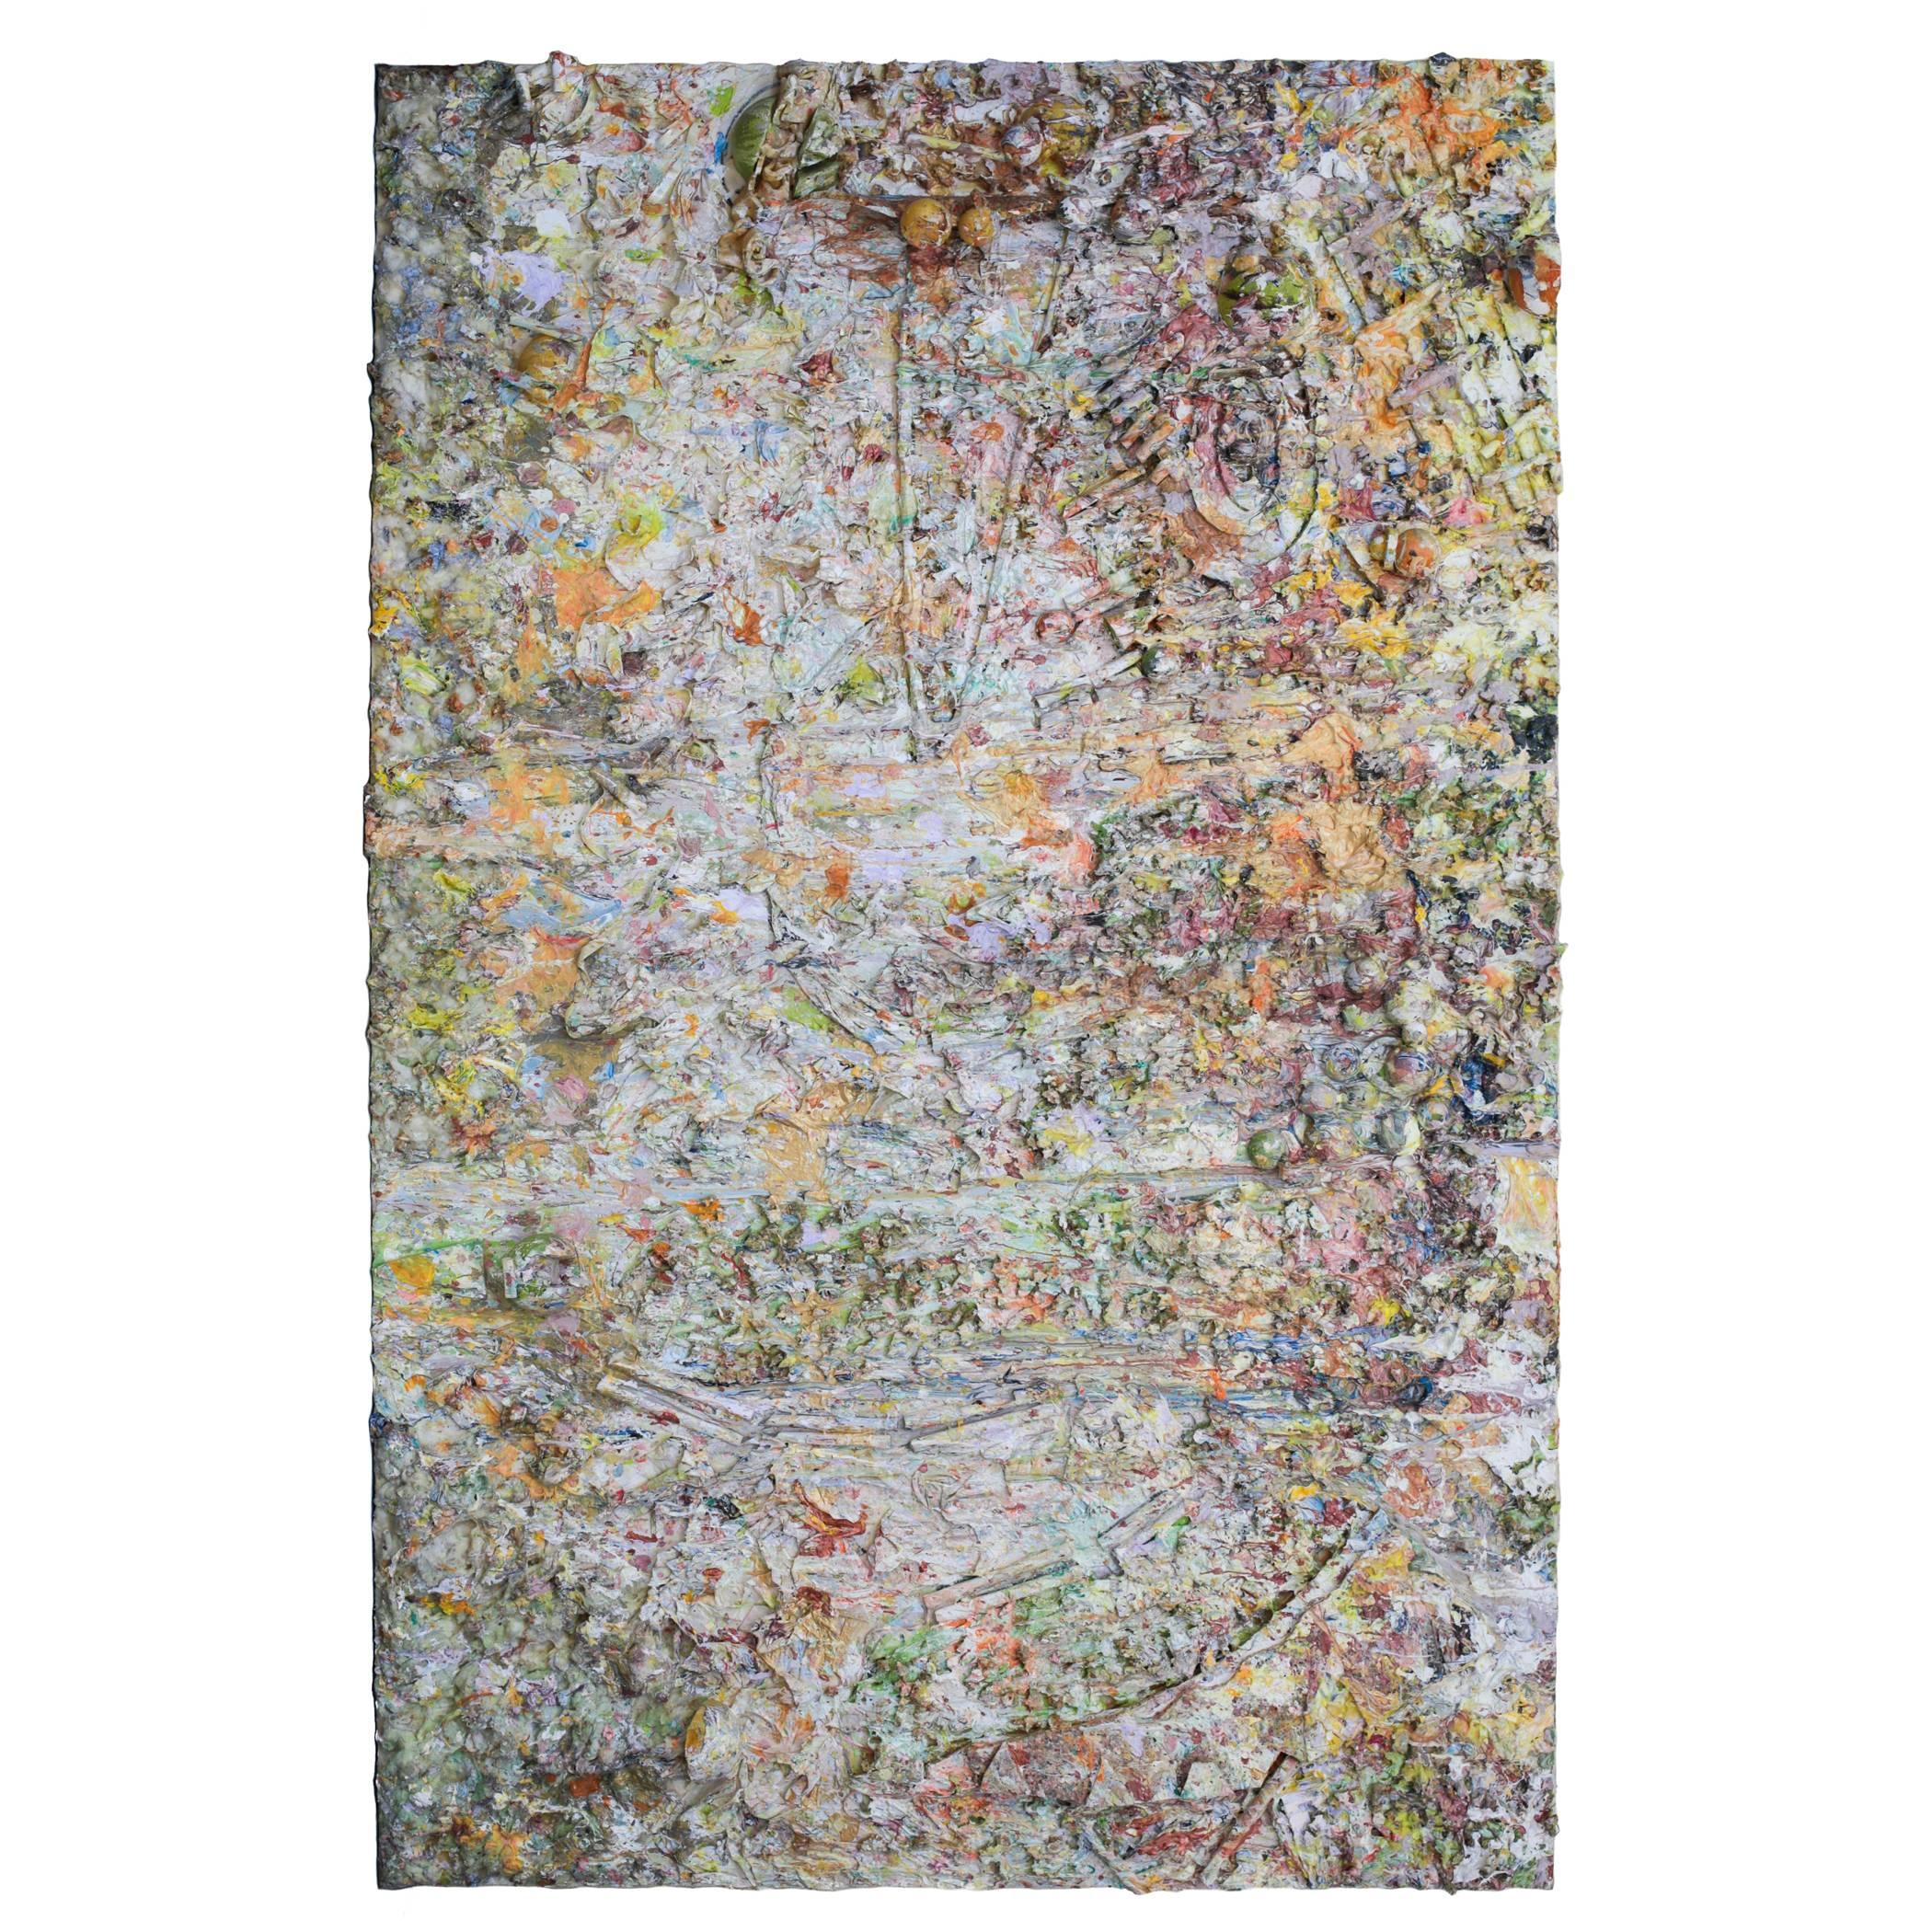 Larry Poons, Retrieval, 1989 For Sale